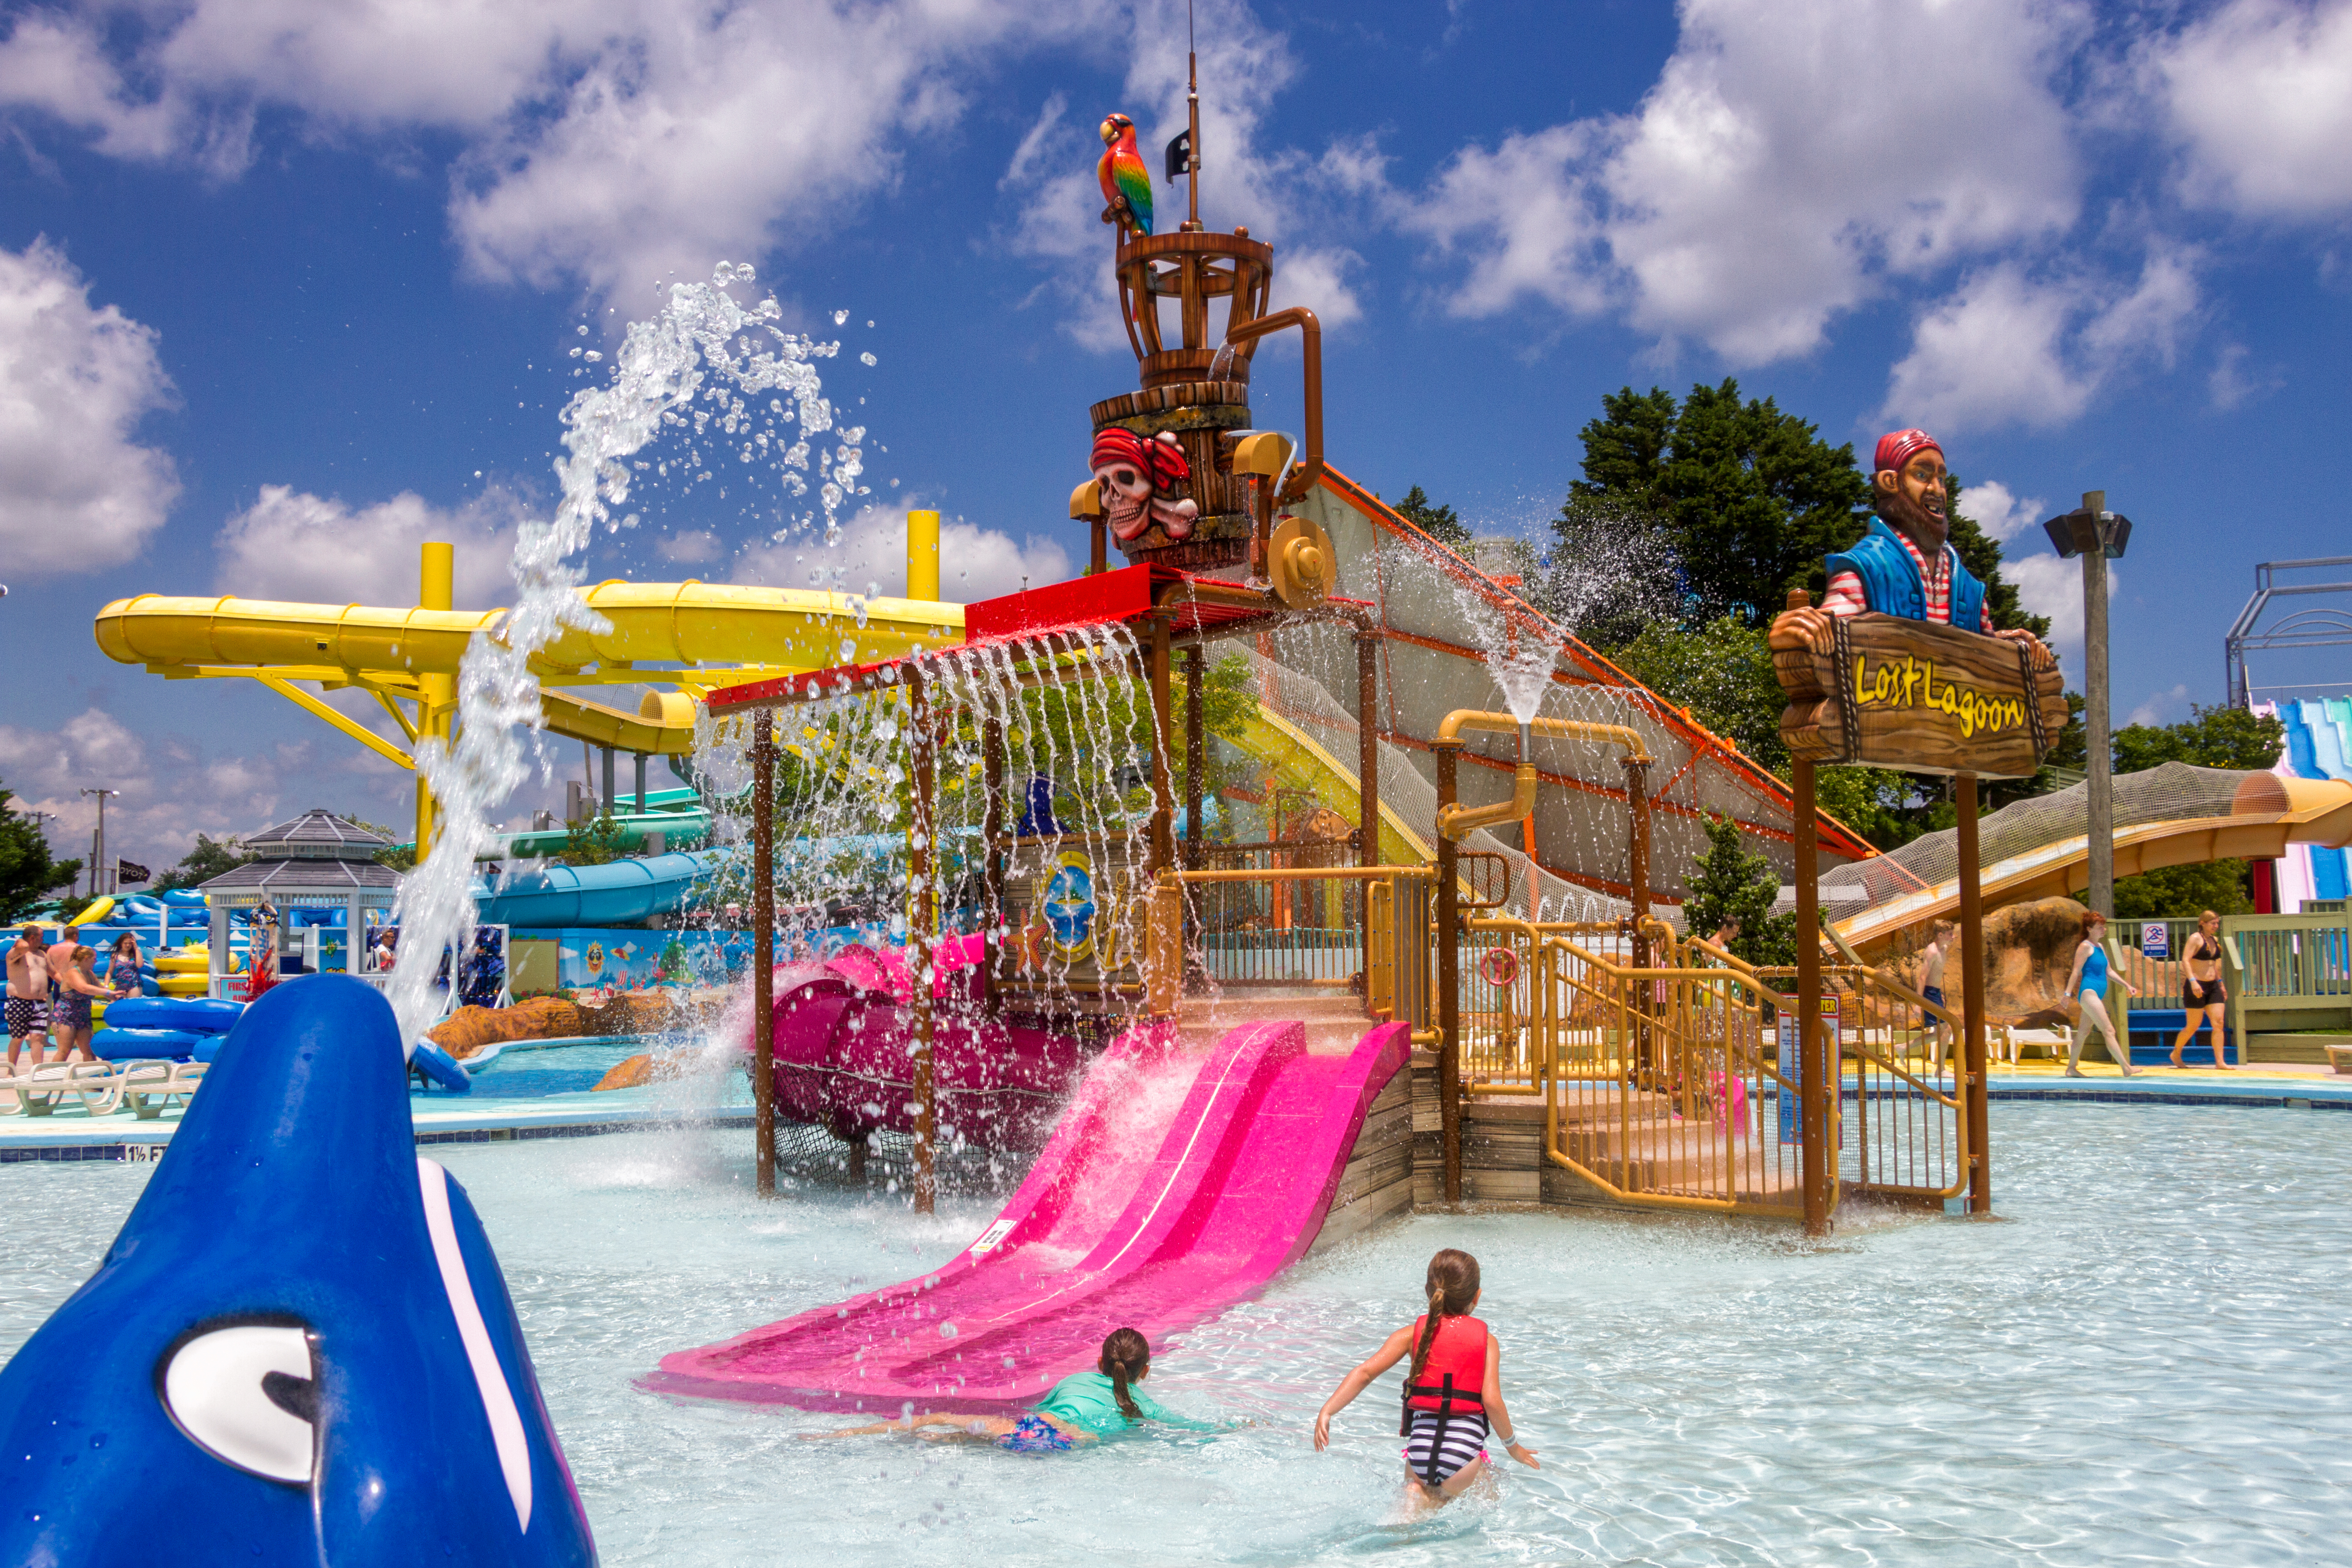 a childrens play area in a water park on a bright sunny day